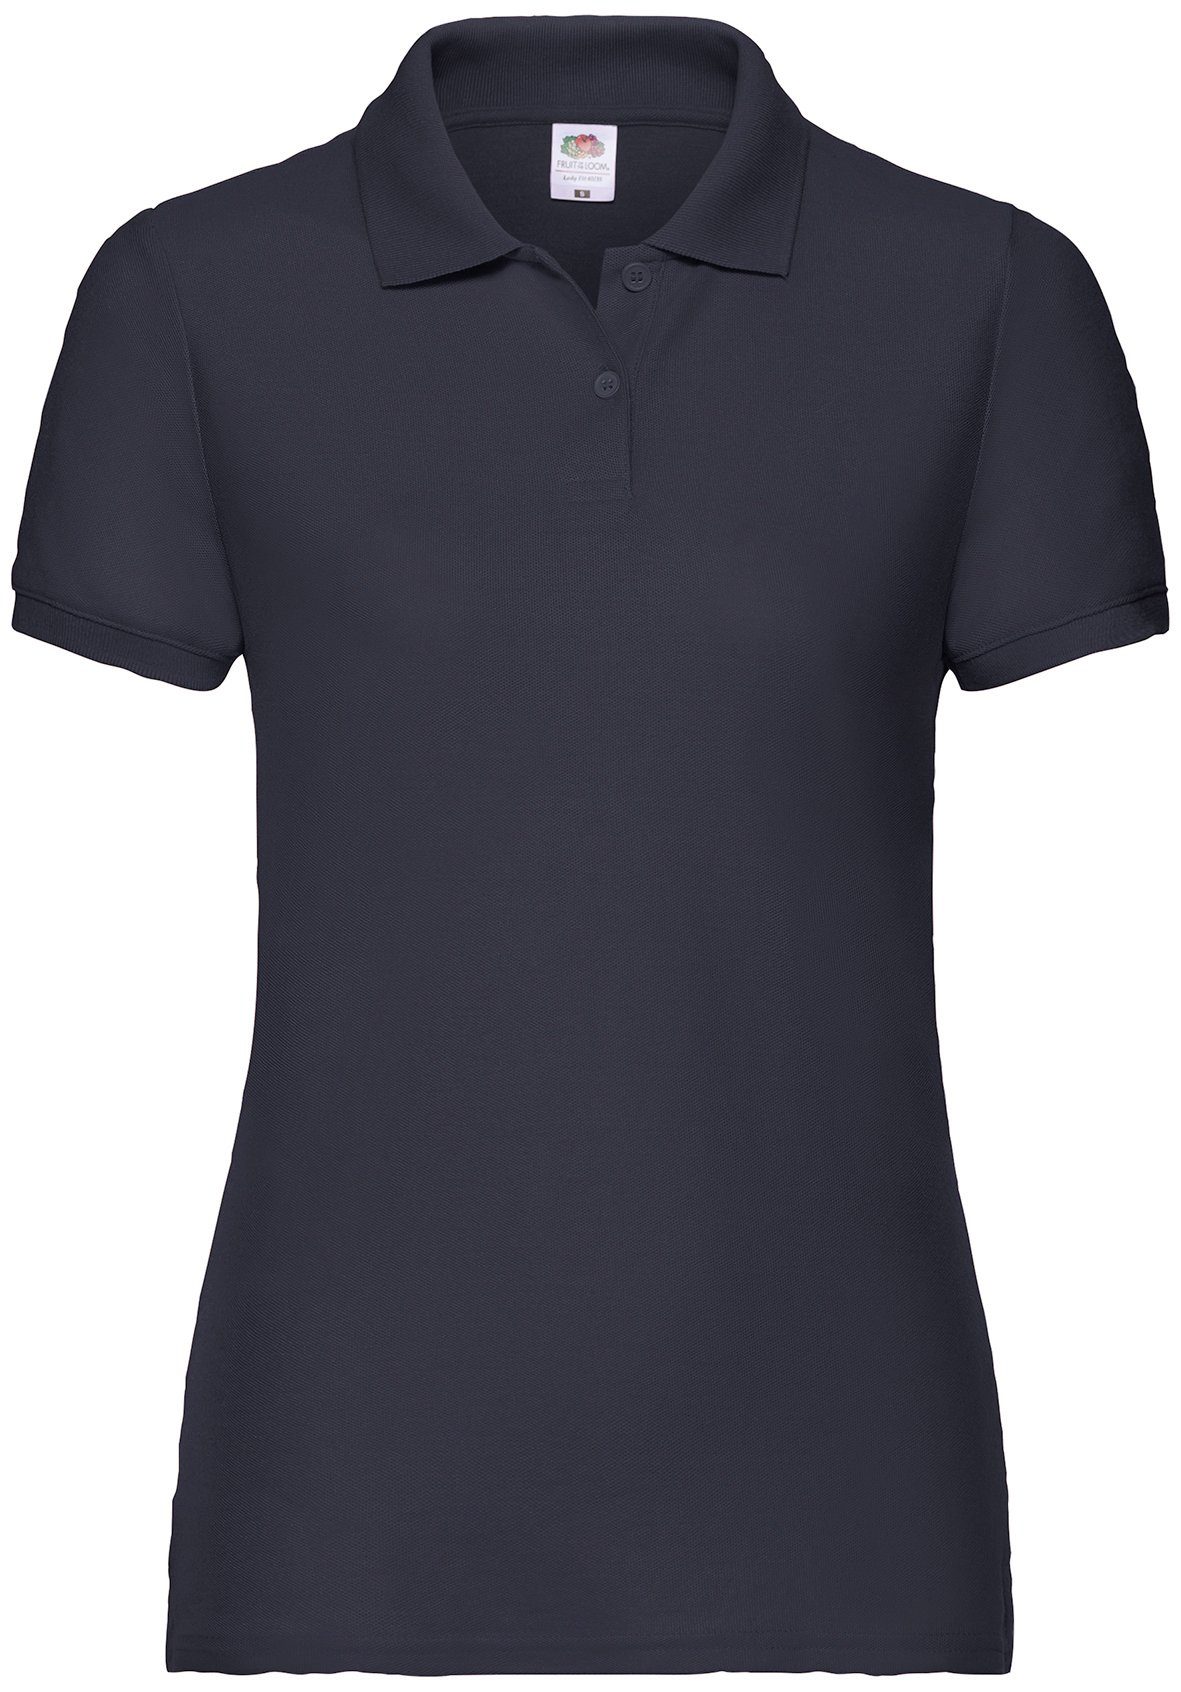 Fruit of the Loom Poloshirt Fruit of the Loom 65/35 Polo Lady-Fit deep navy